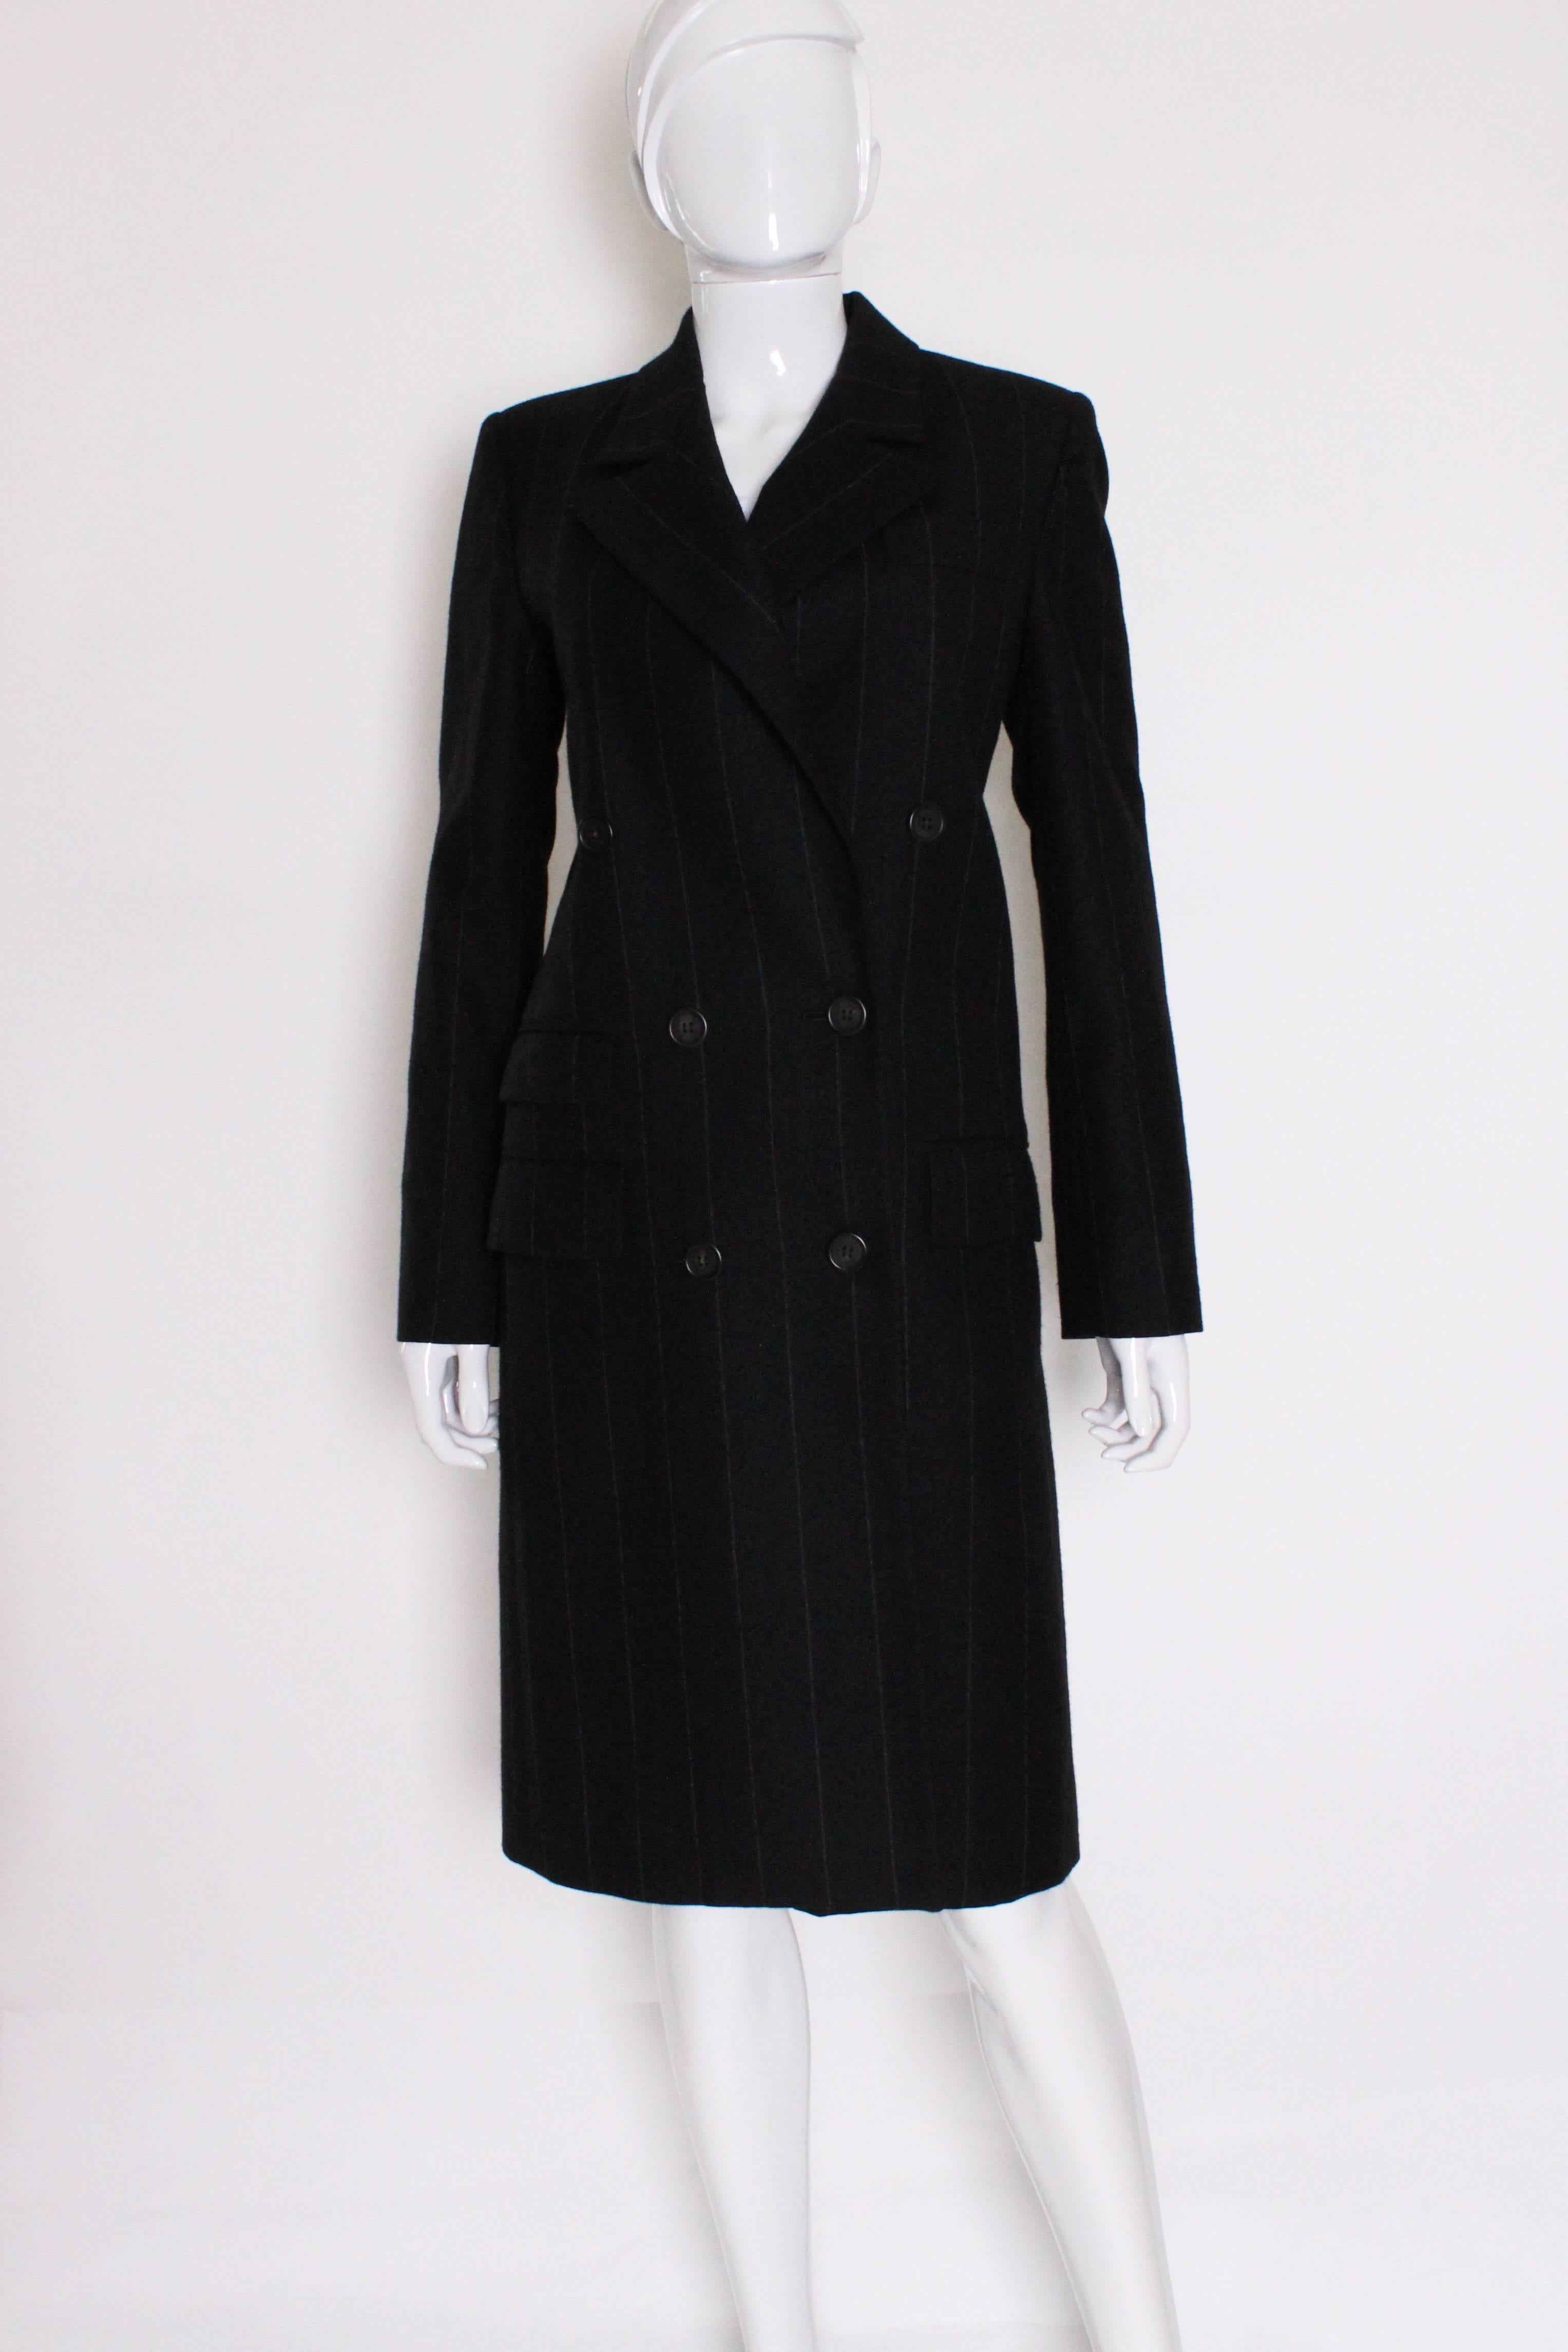 A great  skirt suit for work, or when you feel like dressing for business.
This suit has a double breasted long jacket and matching skirt.
The fabric is a 90% wool, 10% cashmere mix.
The jacket is double breasted and has one pocket on the left